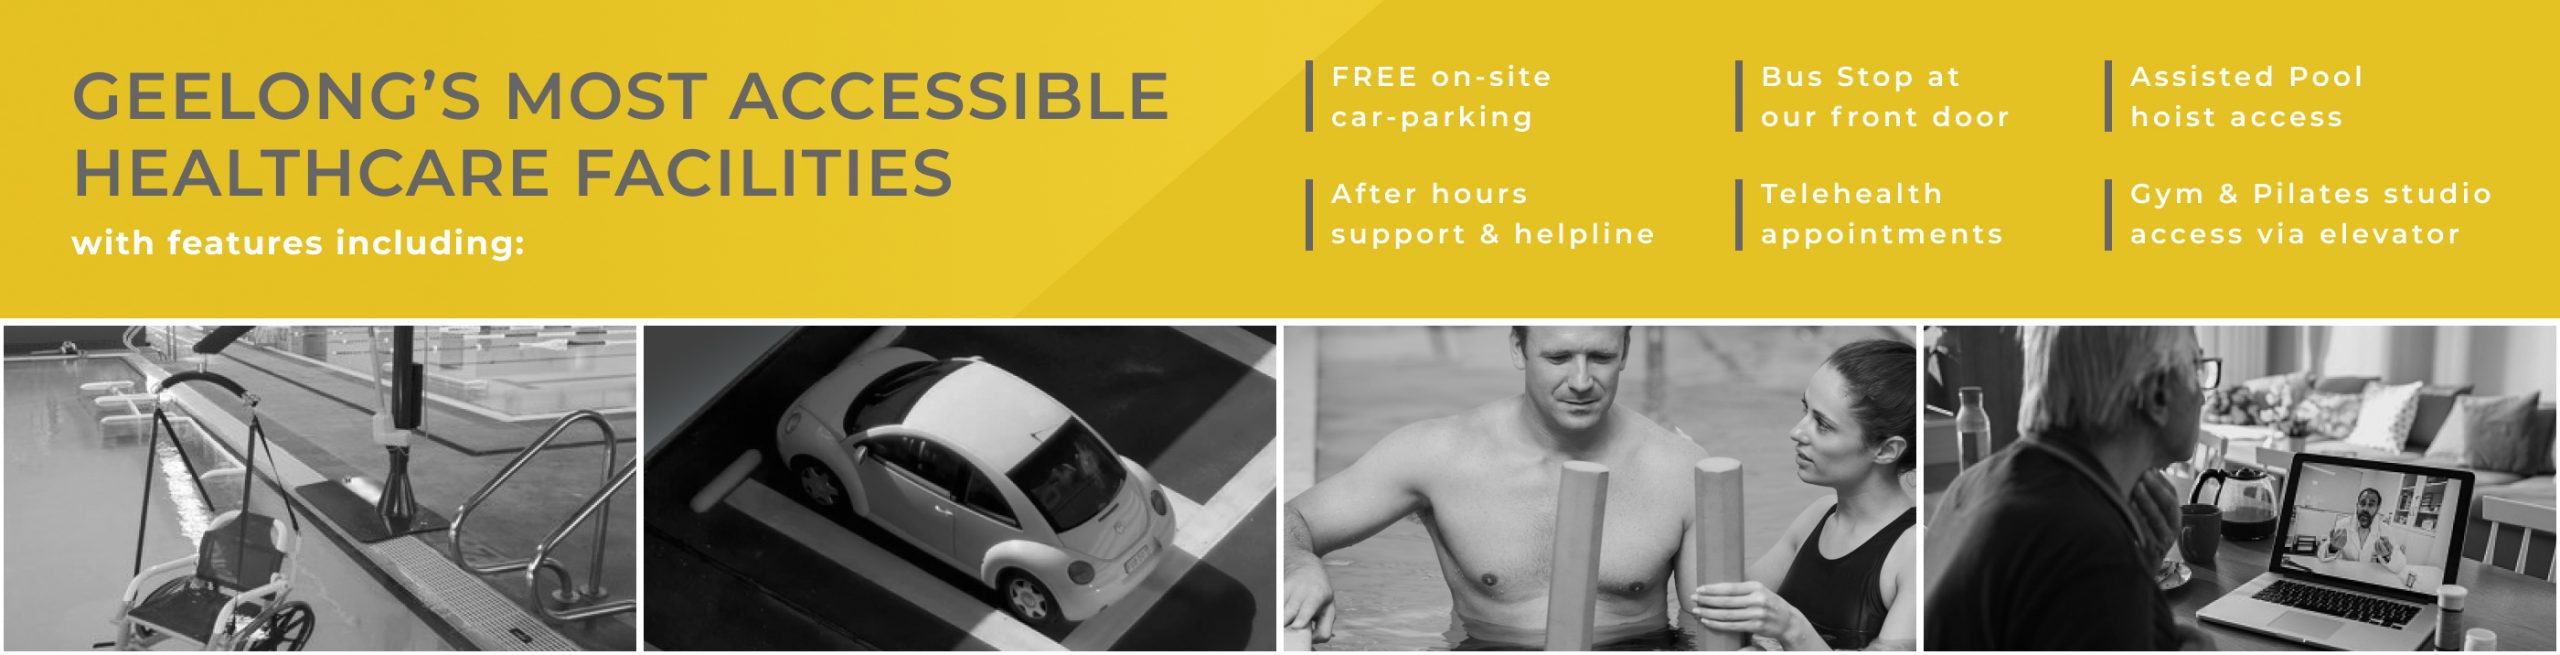 Geelongs most accessible healthcare facilities with features including, Free on site car parking, Bus stop at our front door, assisted pool hoist access, after hours support & helpline, telehealth appointments, gym & pilates studio access via elevator